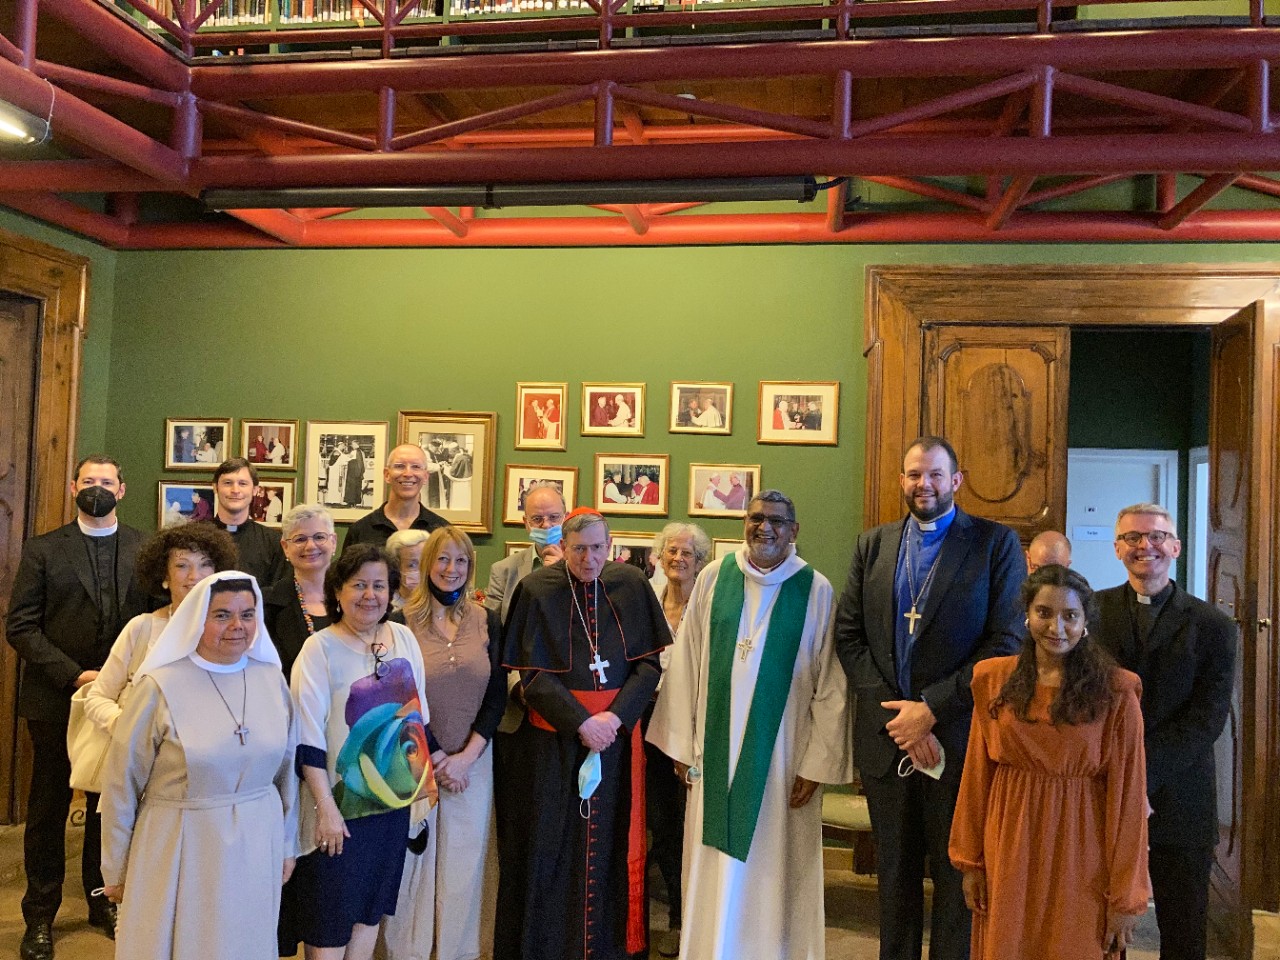 Cardinal Kurt Koch, president of the PCPCU, and Archbishop Ian Ernest, director of the Anglican Centre in Rome in a group photo at the Anglican Centre following a liturgy celebrating the Venerable Bede